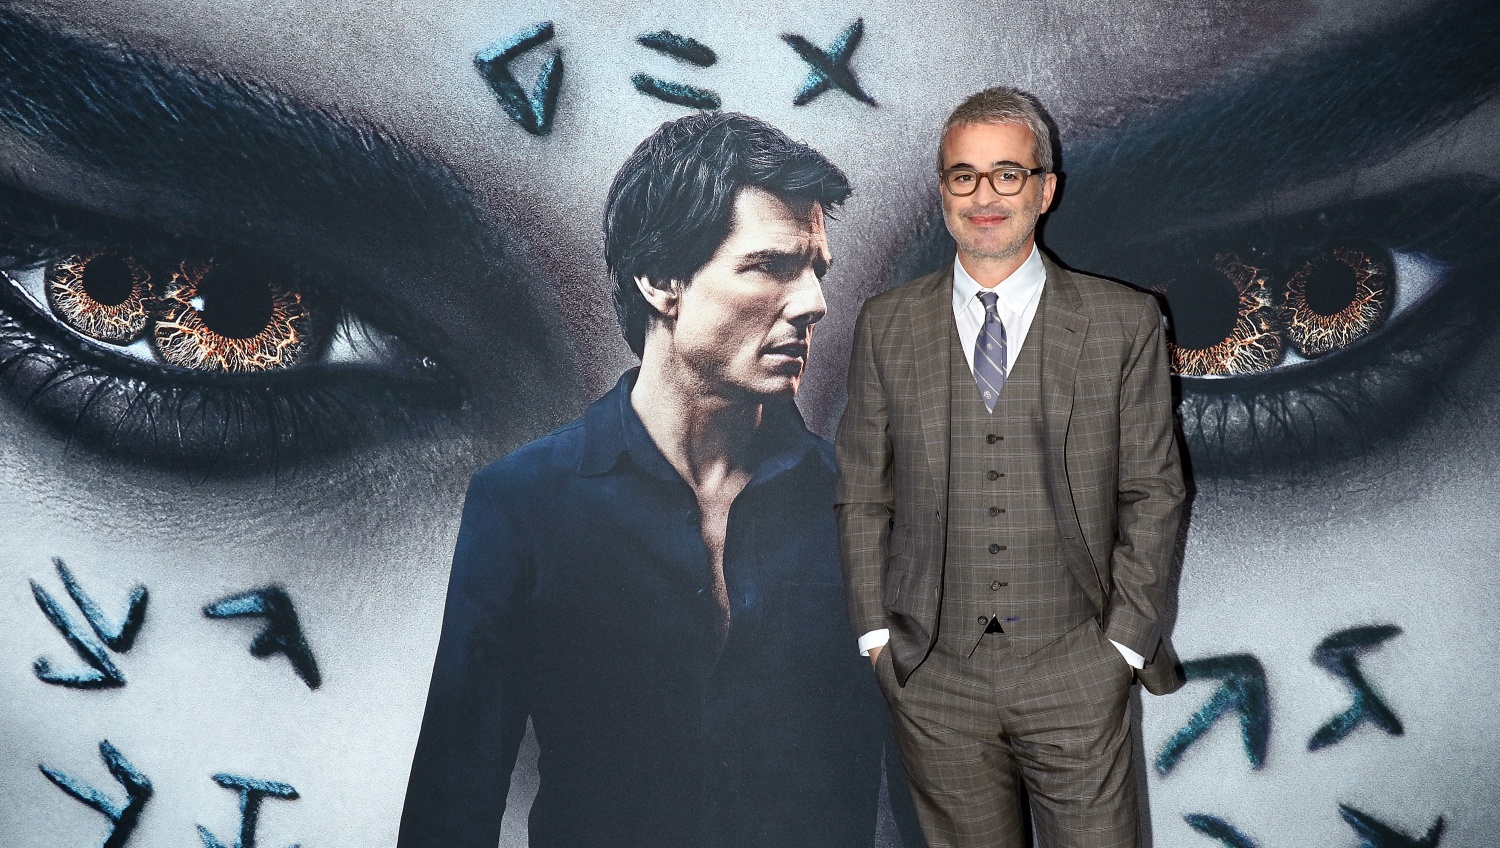  Director Alex Kurtzman attends "The Mummy" New York fan event at AMC Loews Lincoln Square on June 6, 2017 in New York City. (Photo by Jim Spellman/WireImage)